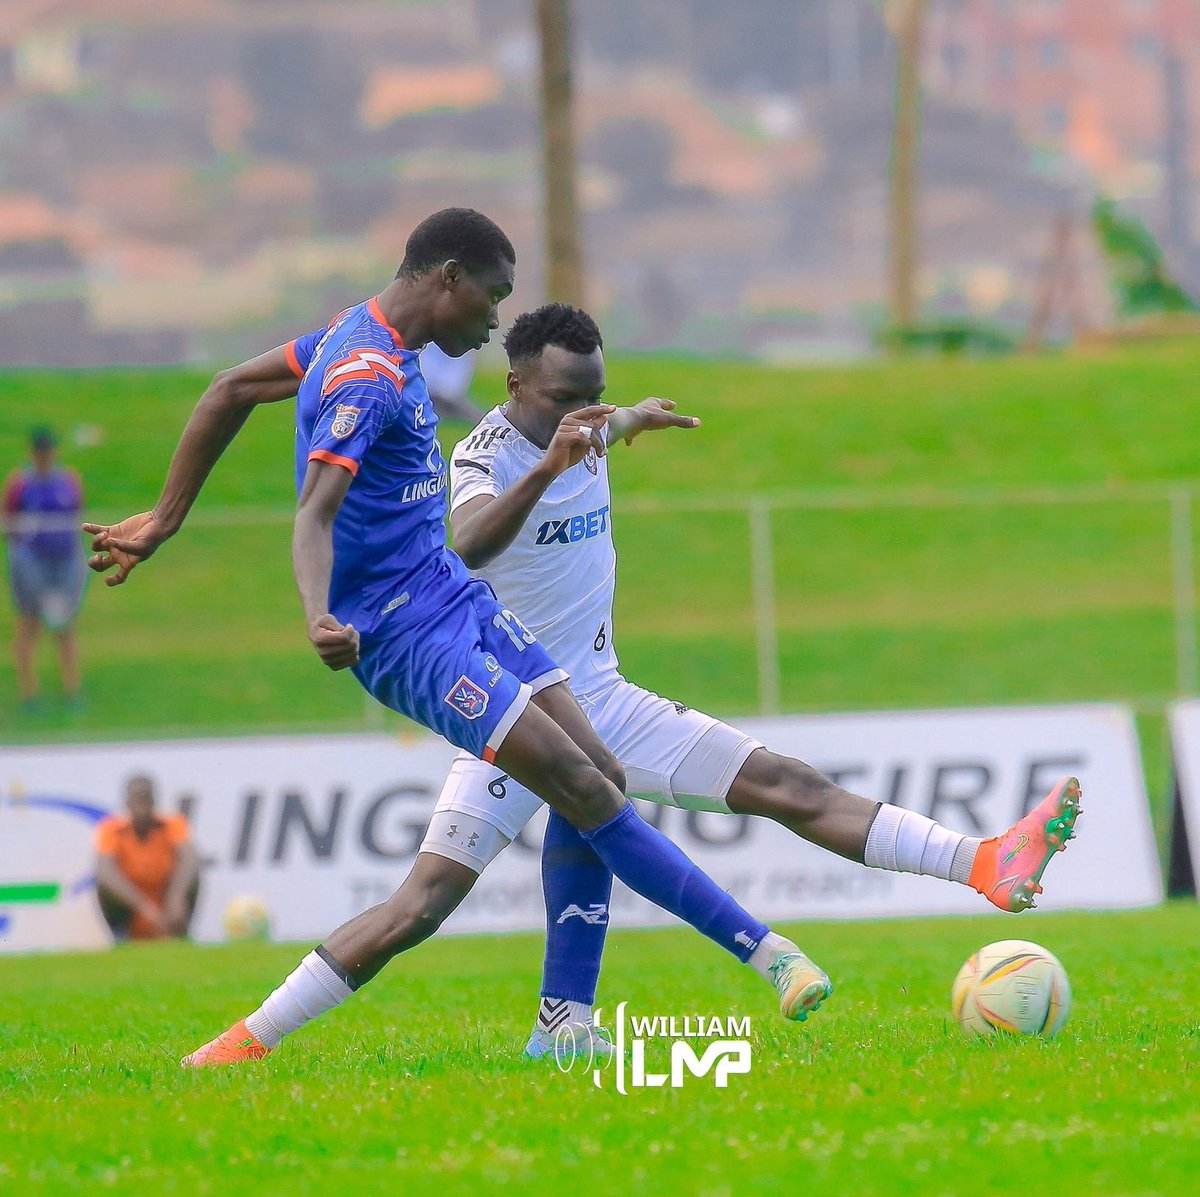 A result that hurts, but we can’t dwell too much on what has already happened.
We have to turn the disappointment into fightback, into motivation to keep working and to improve.
@WakisoGiantsFC